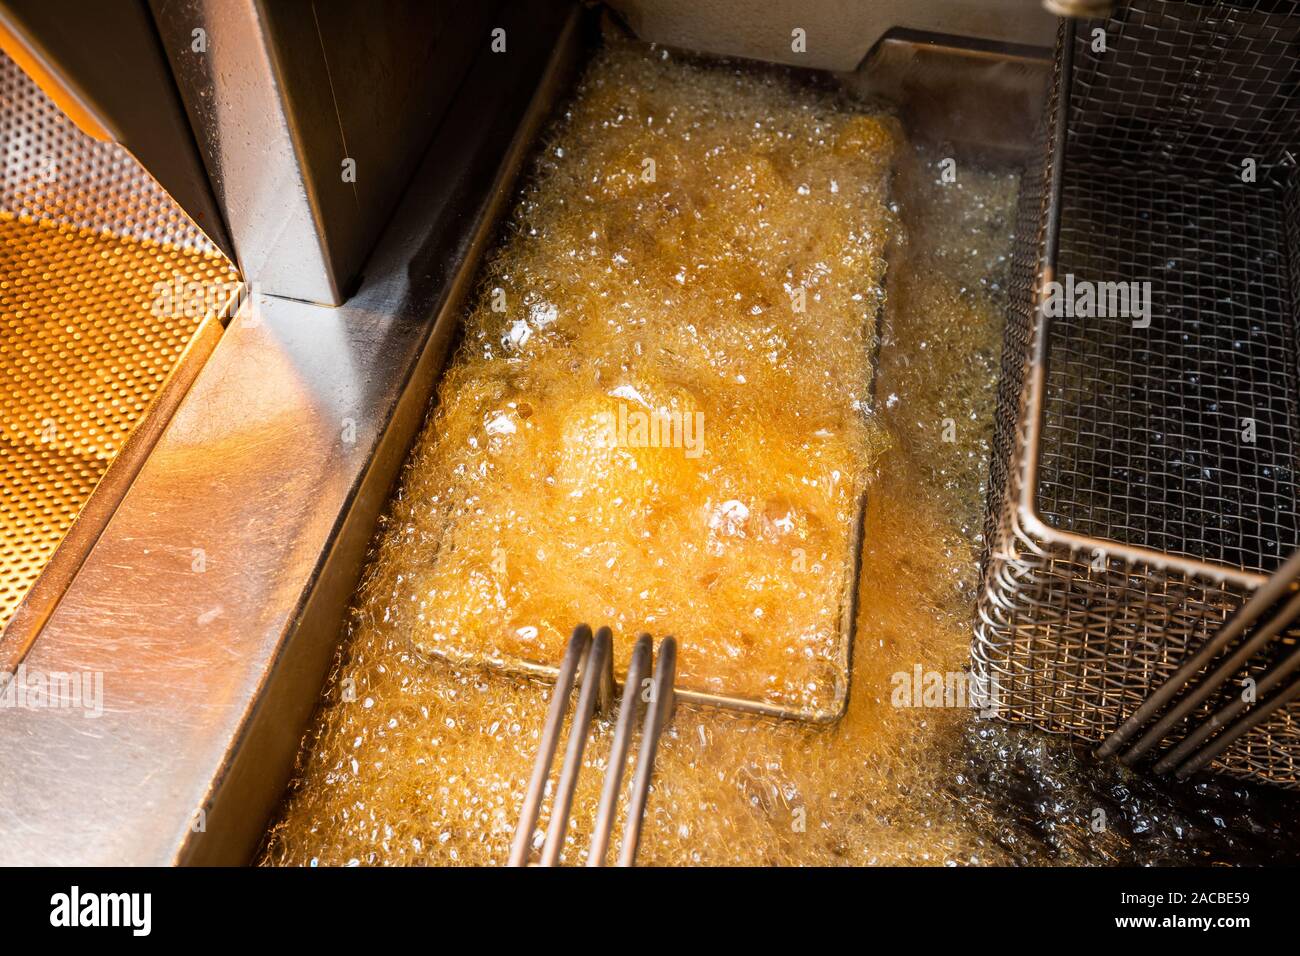 https://c8.alamy.com/comp/2ACBE59/chips-in-a-deep-fat-fryer-in-a-fish-and-chip-shop-in-the-united-kingdom-2ACBE59.jpg